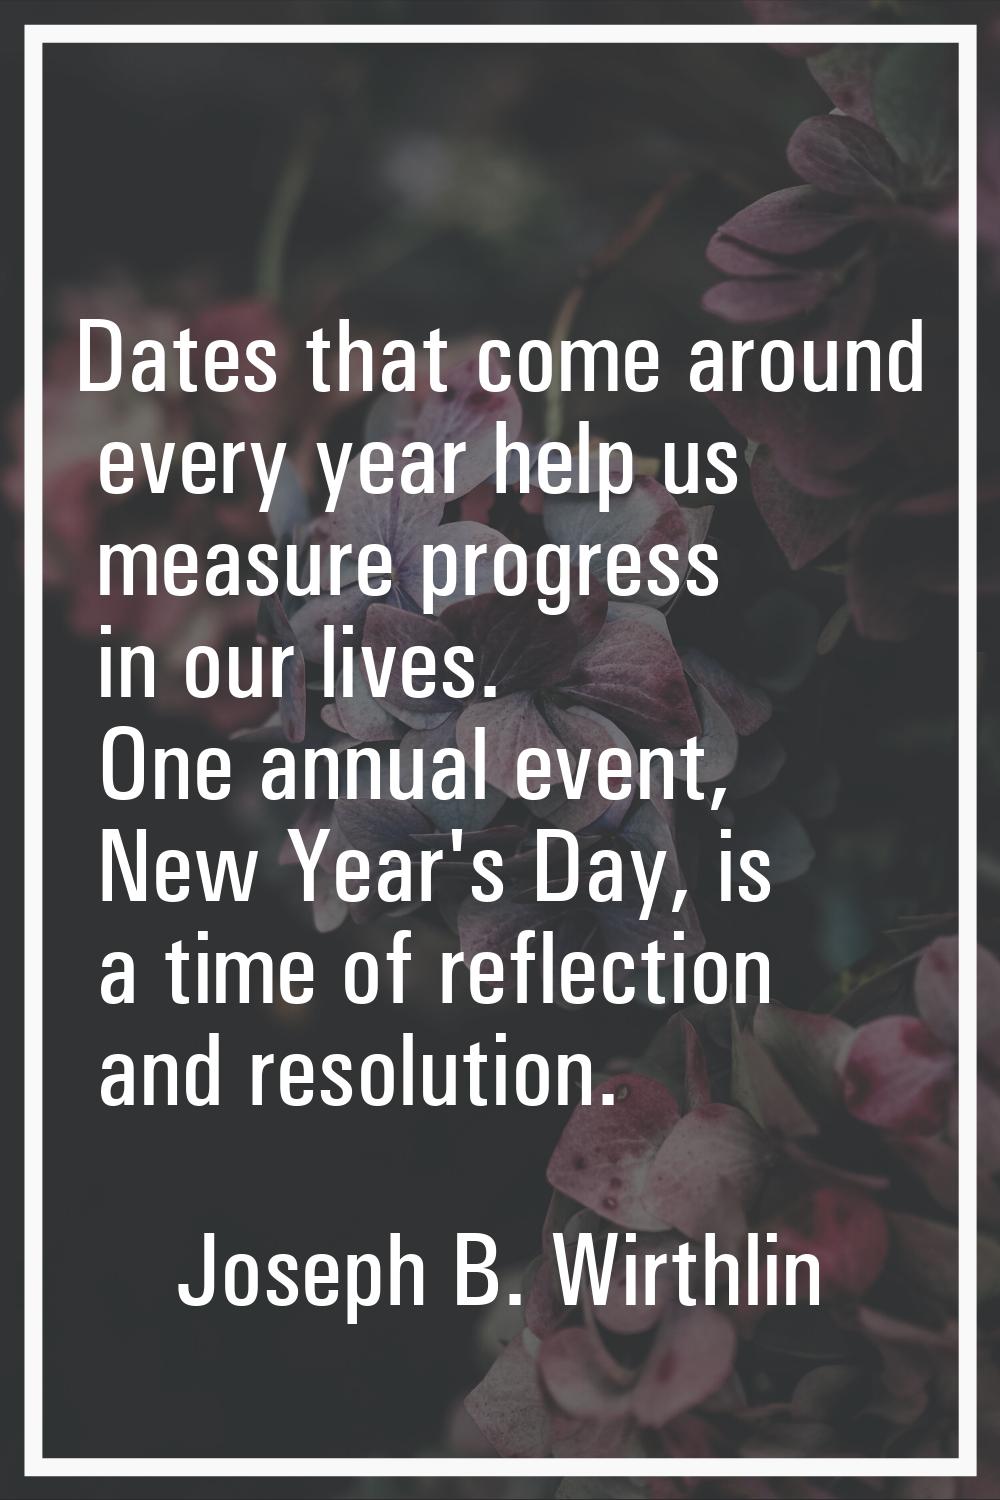 Dates that come around every year help us measure progress in our lives. One annual event, New Year